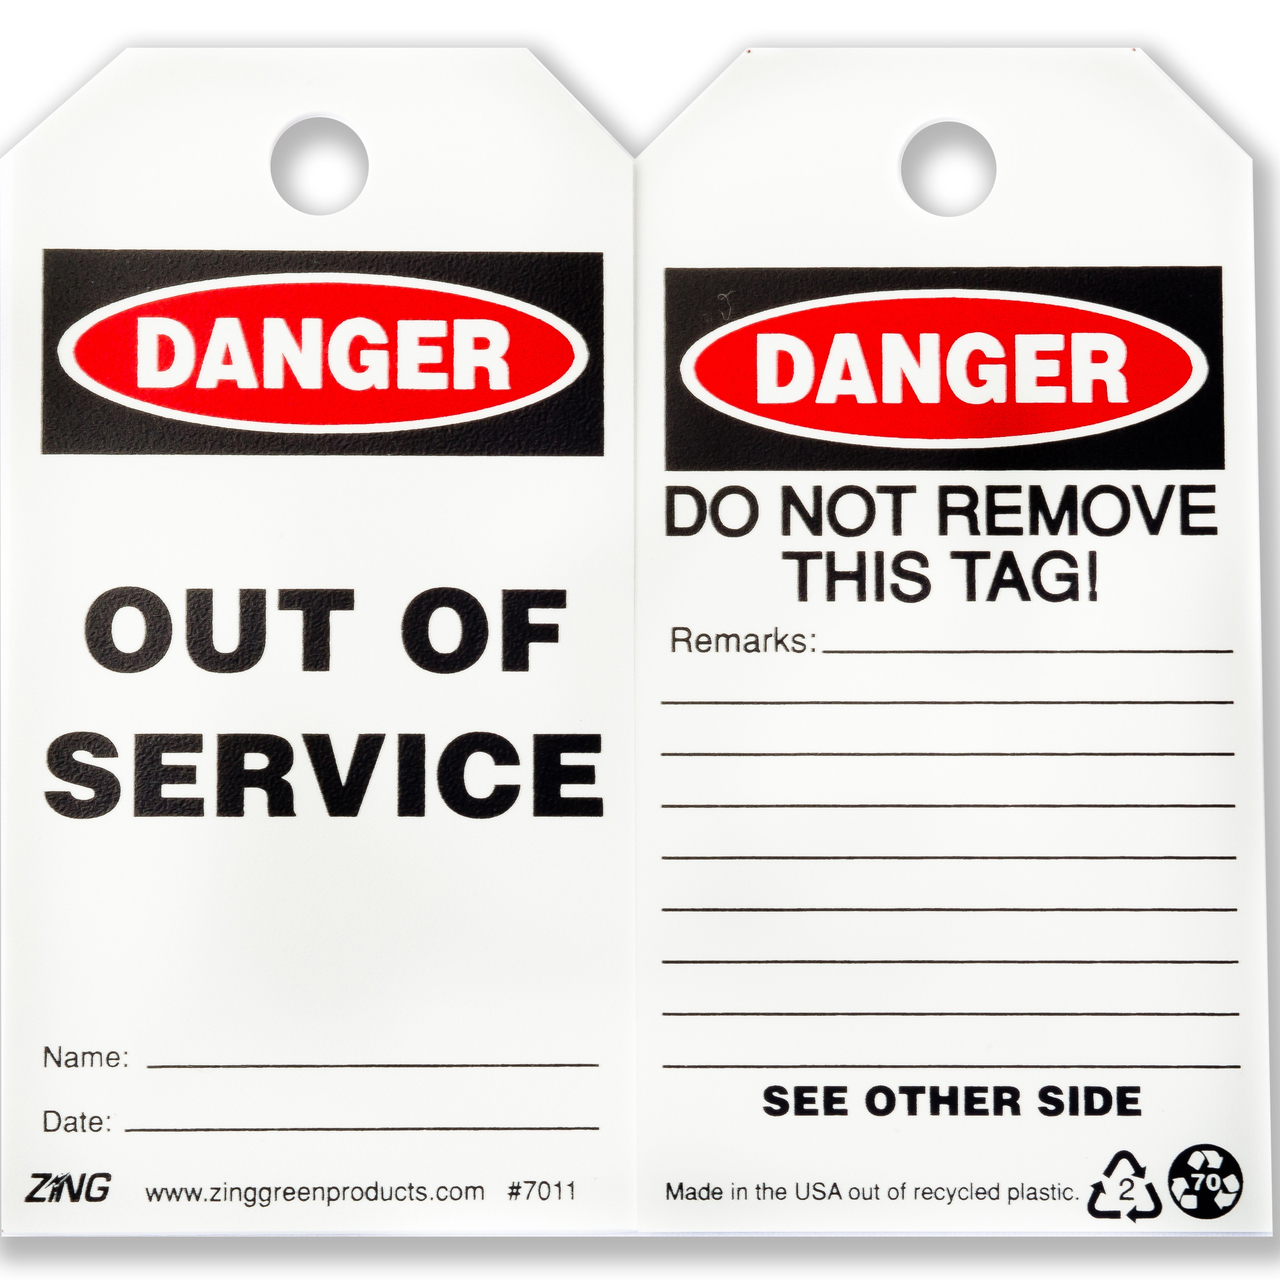 ZING Eco Safety Tag, DANGER Out of Service, 5.75Hx3W, 10 Pack